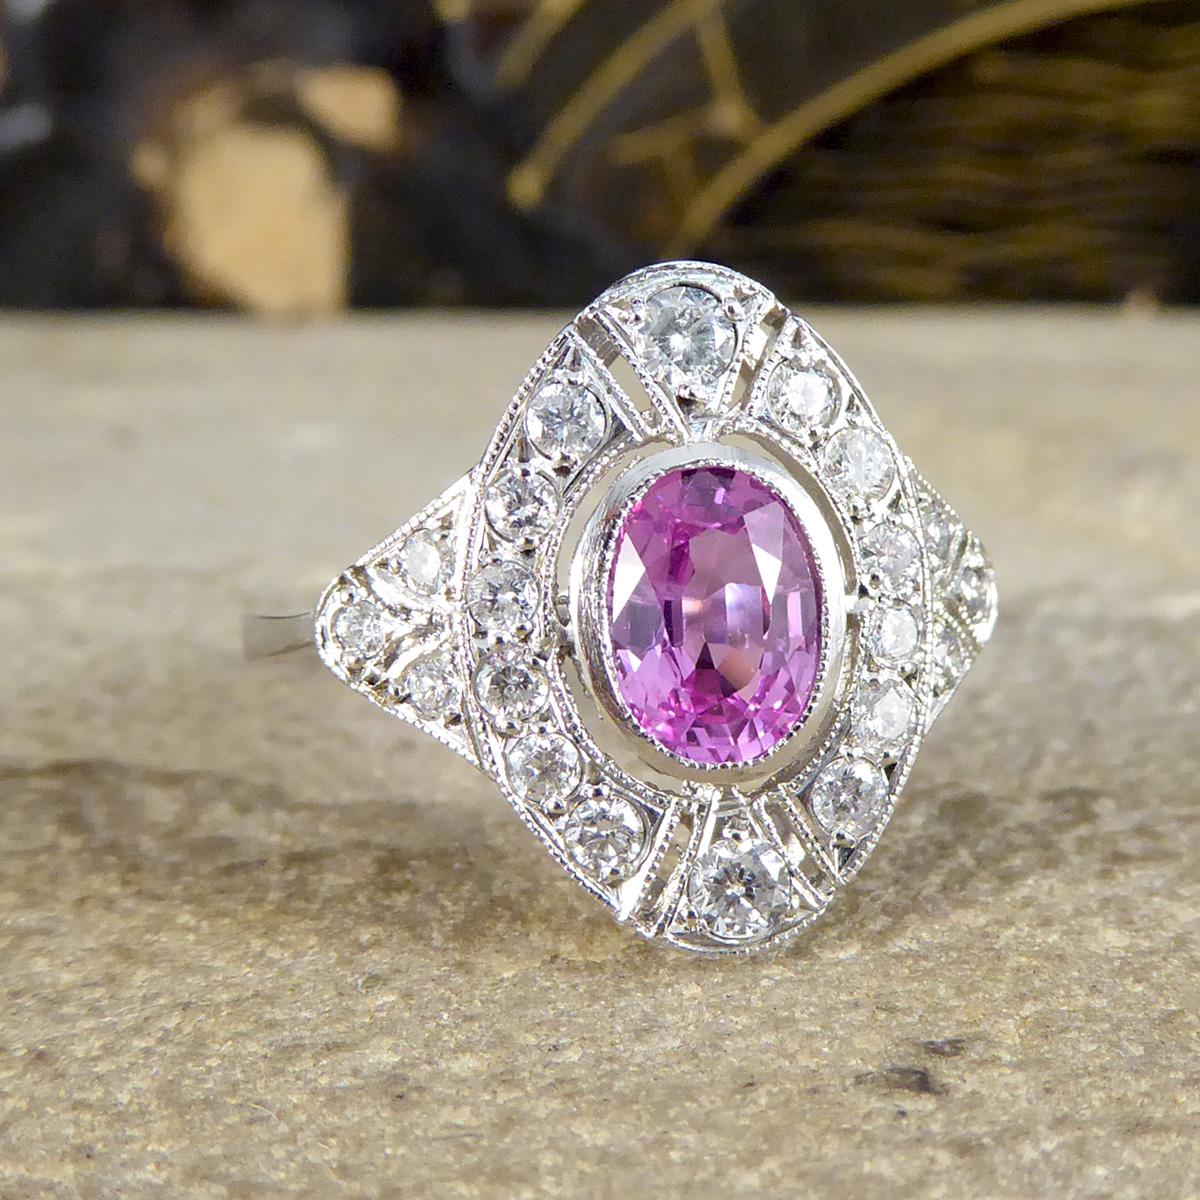 The design of this ring has been inspired from the classic Art Deco period, however has been crafted recently. Modelled in Platinum, the design features a beautiful and bright oval cut Pink Sapphire weighing 0.90ct in the centre with a surround of